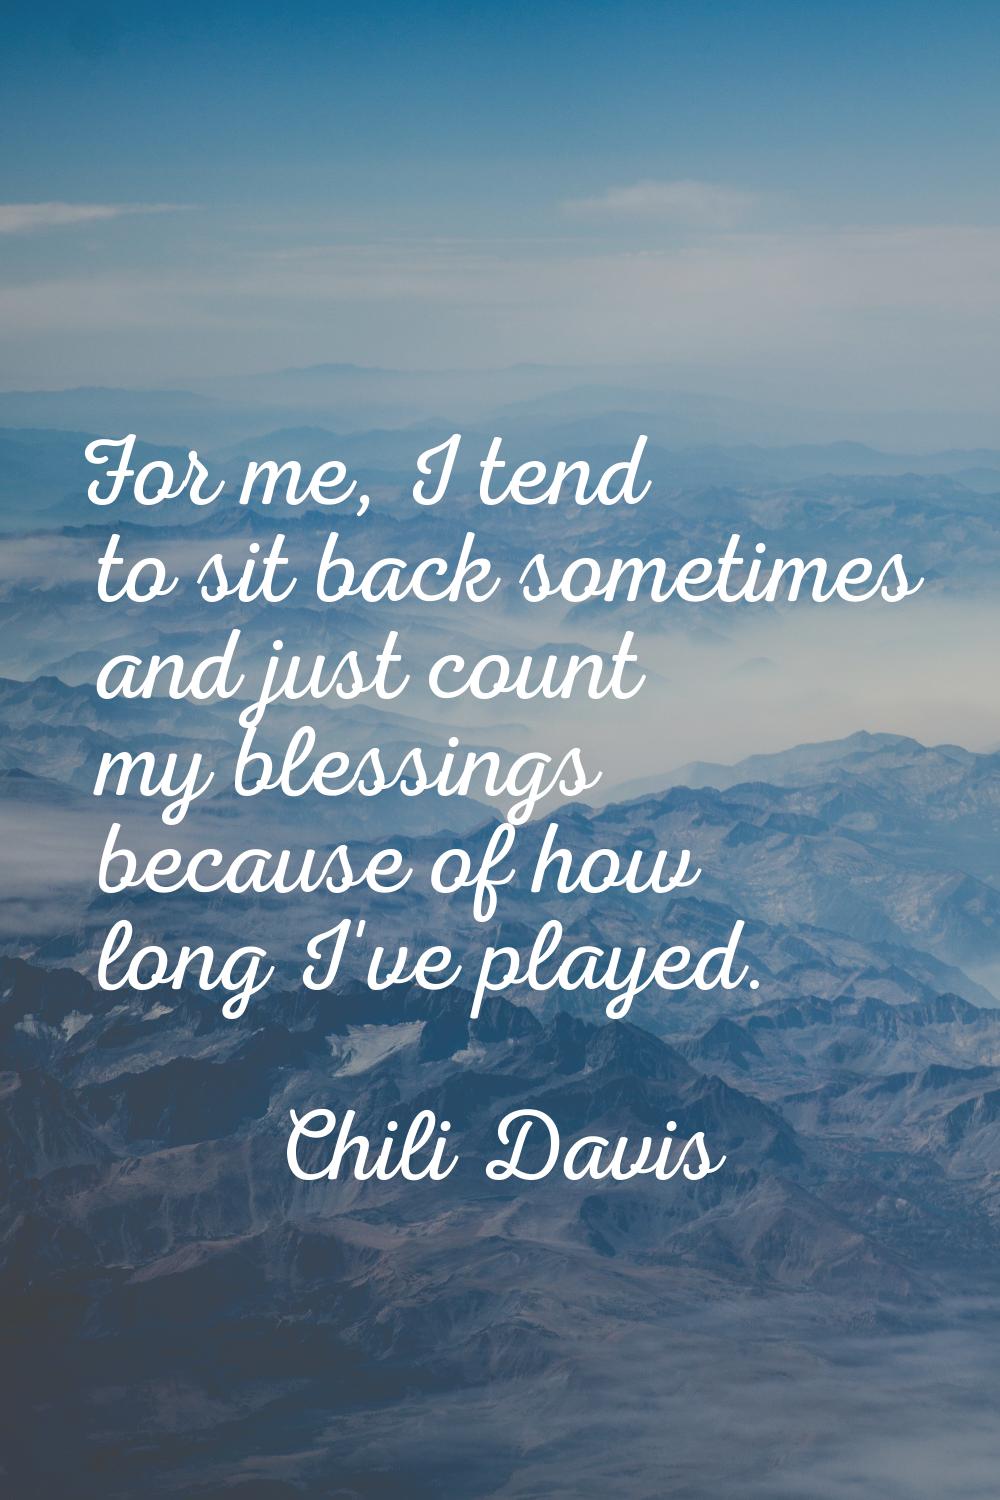 For me, I tend to sit back sometimes and just count my blessings because of how long I've played.